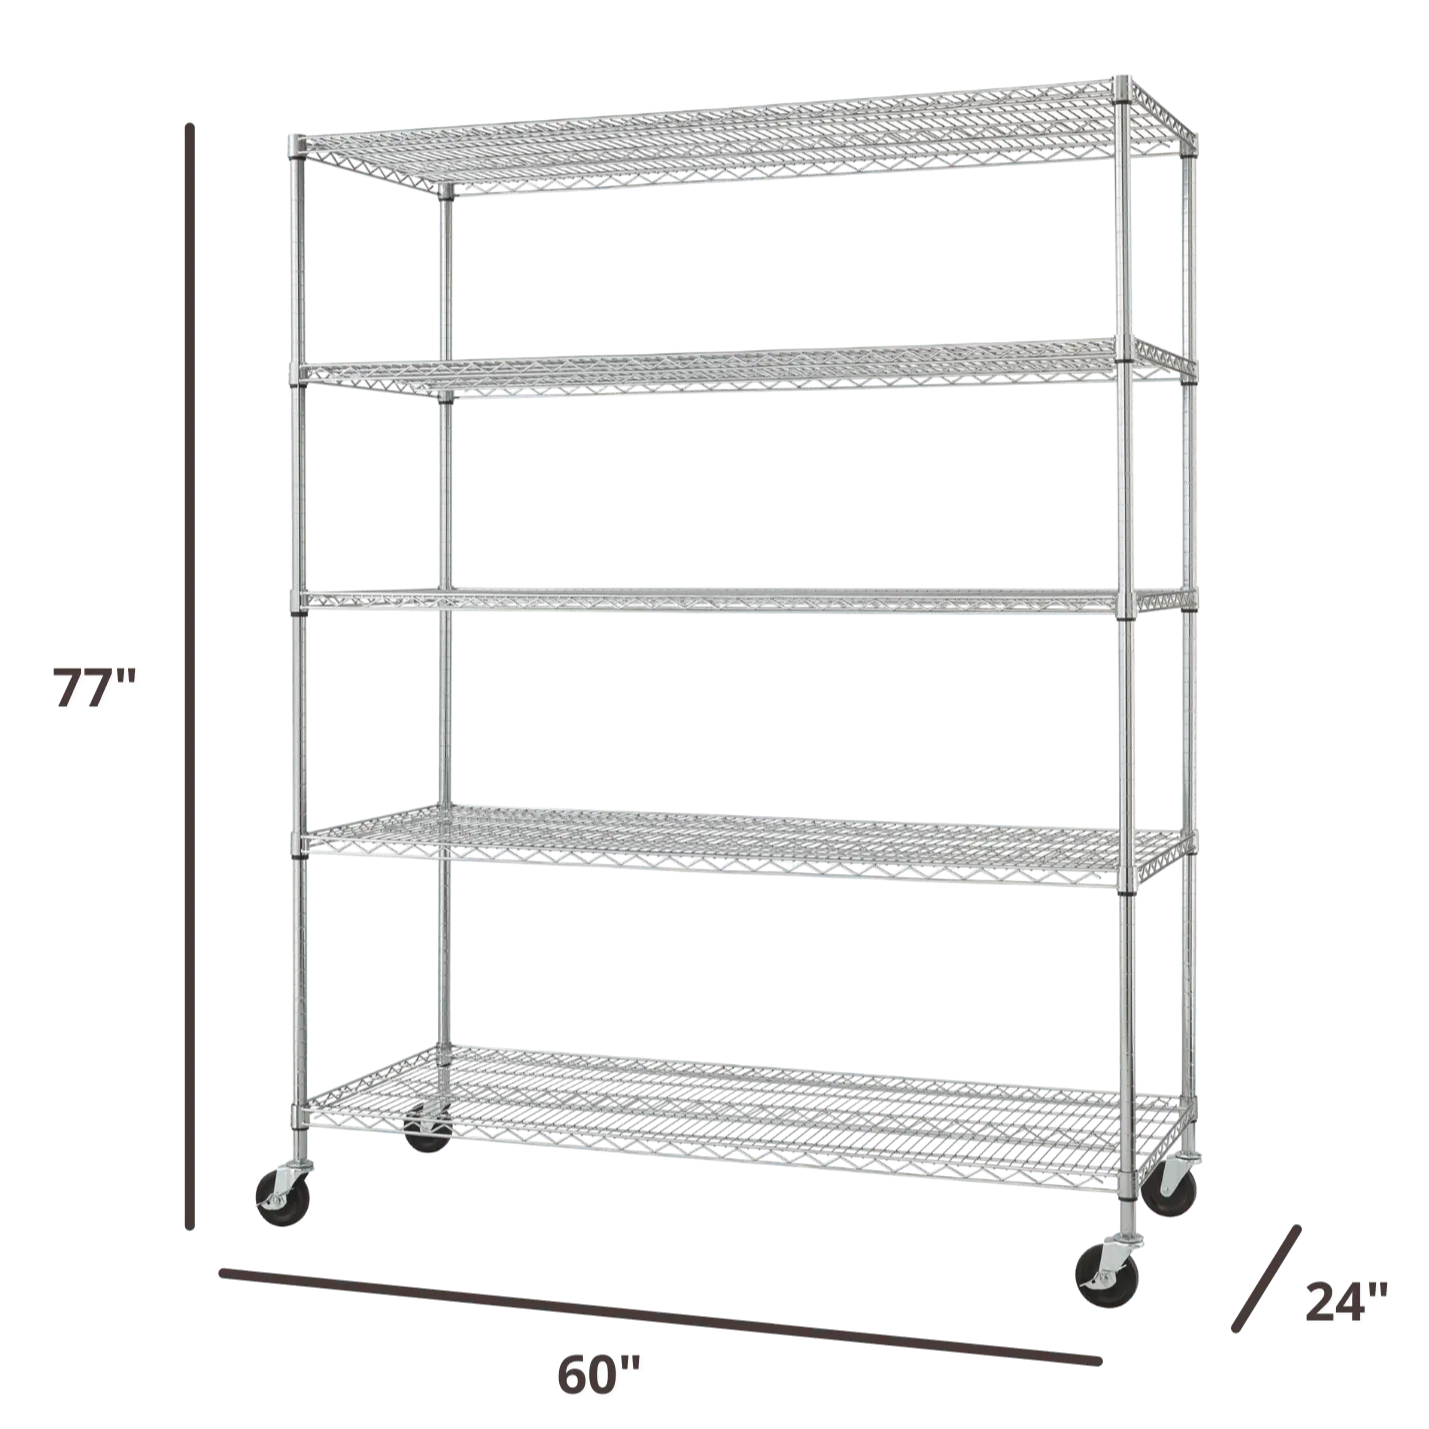 60 inches wide by 24 inches deep wire shelving rack in chrome